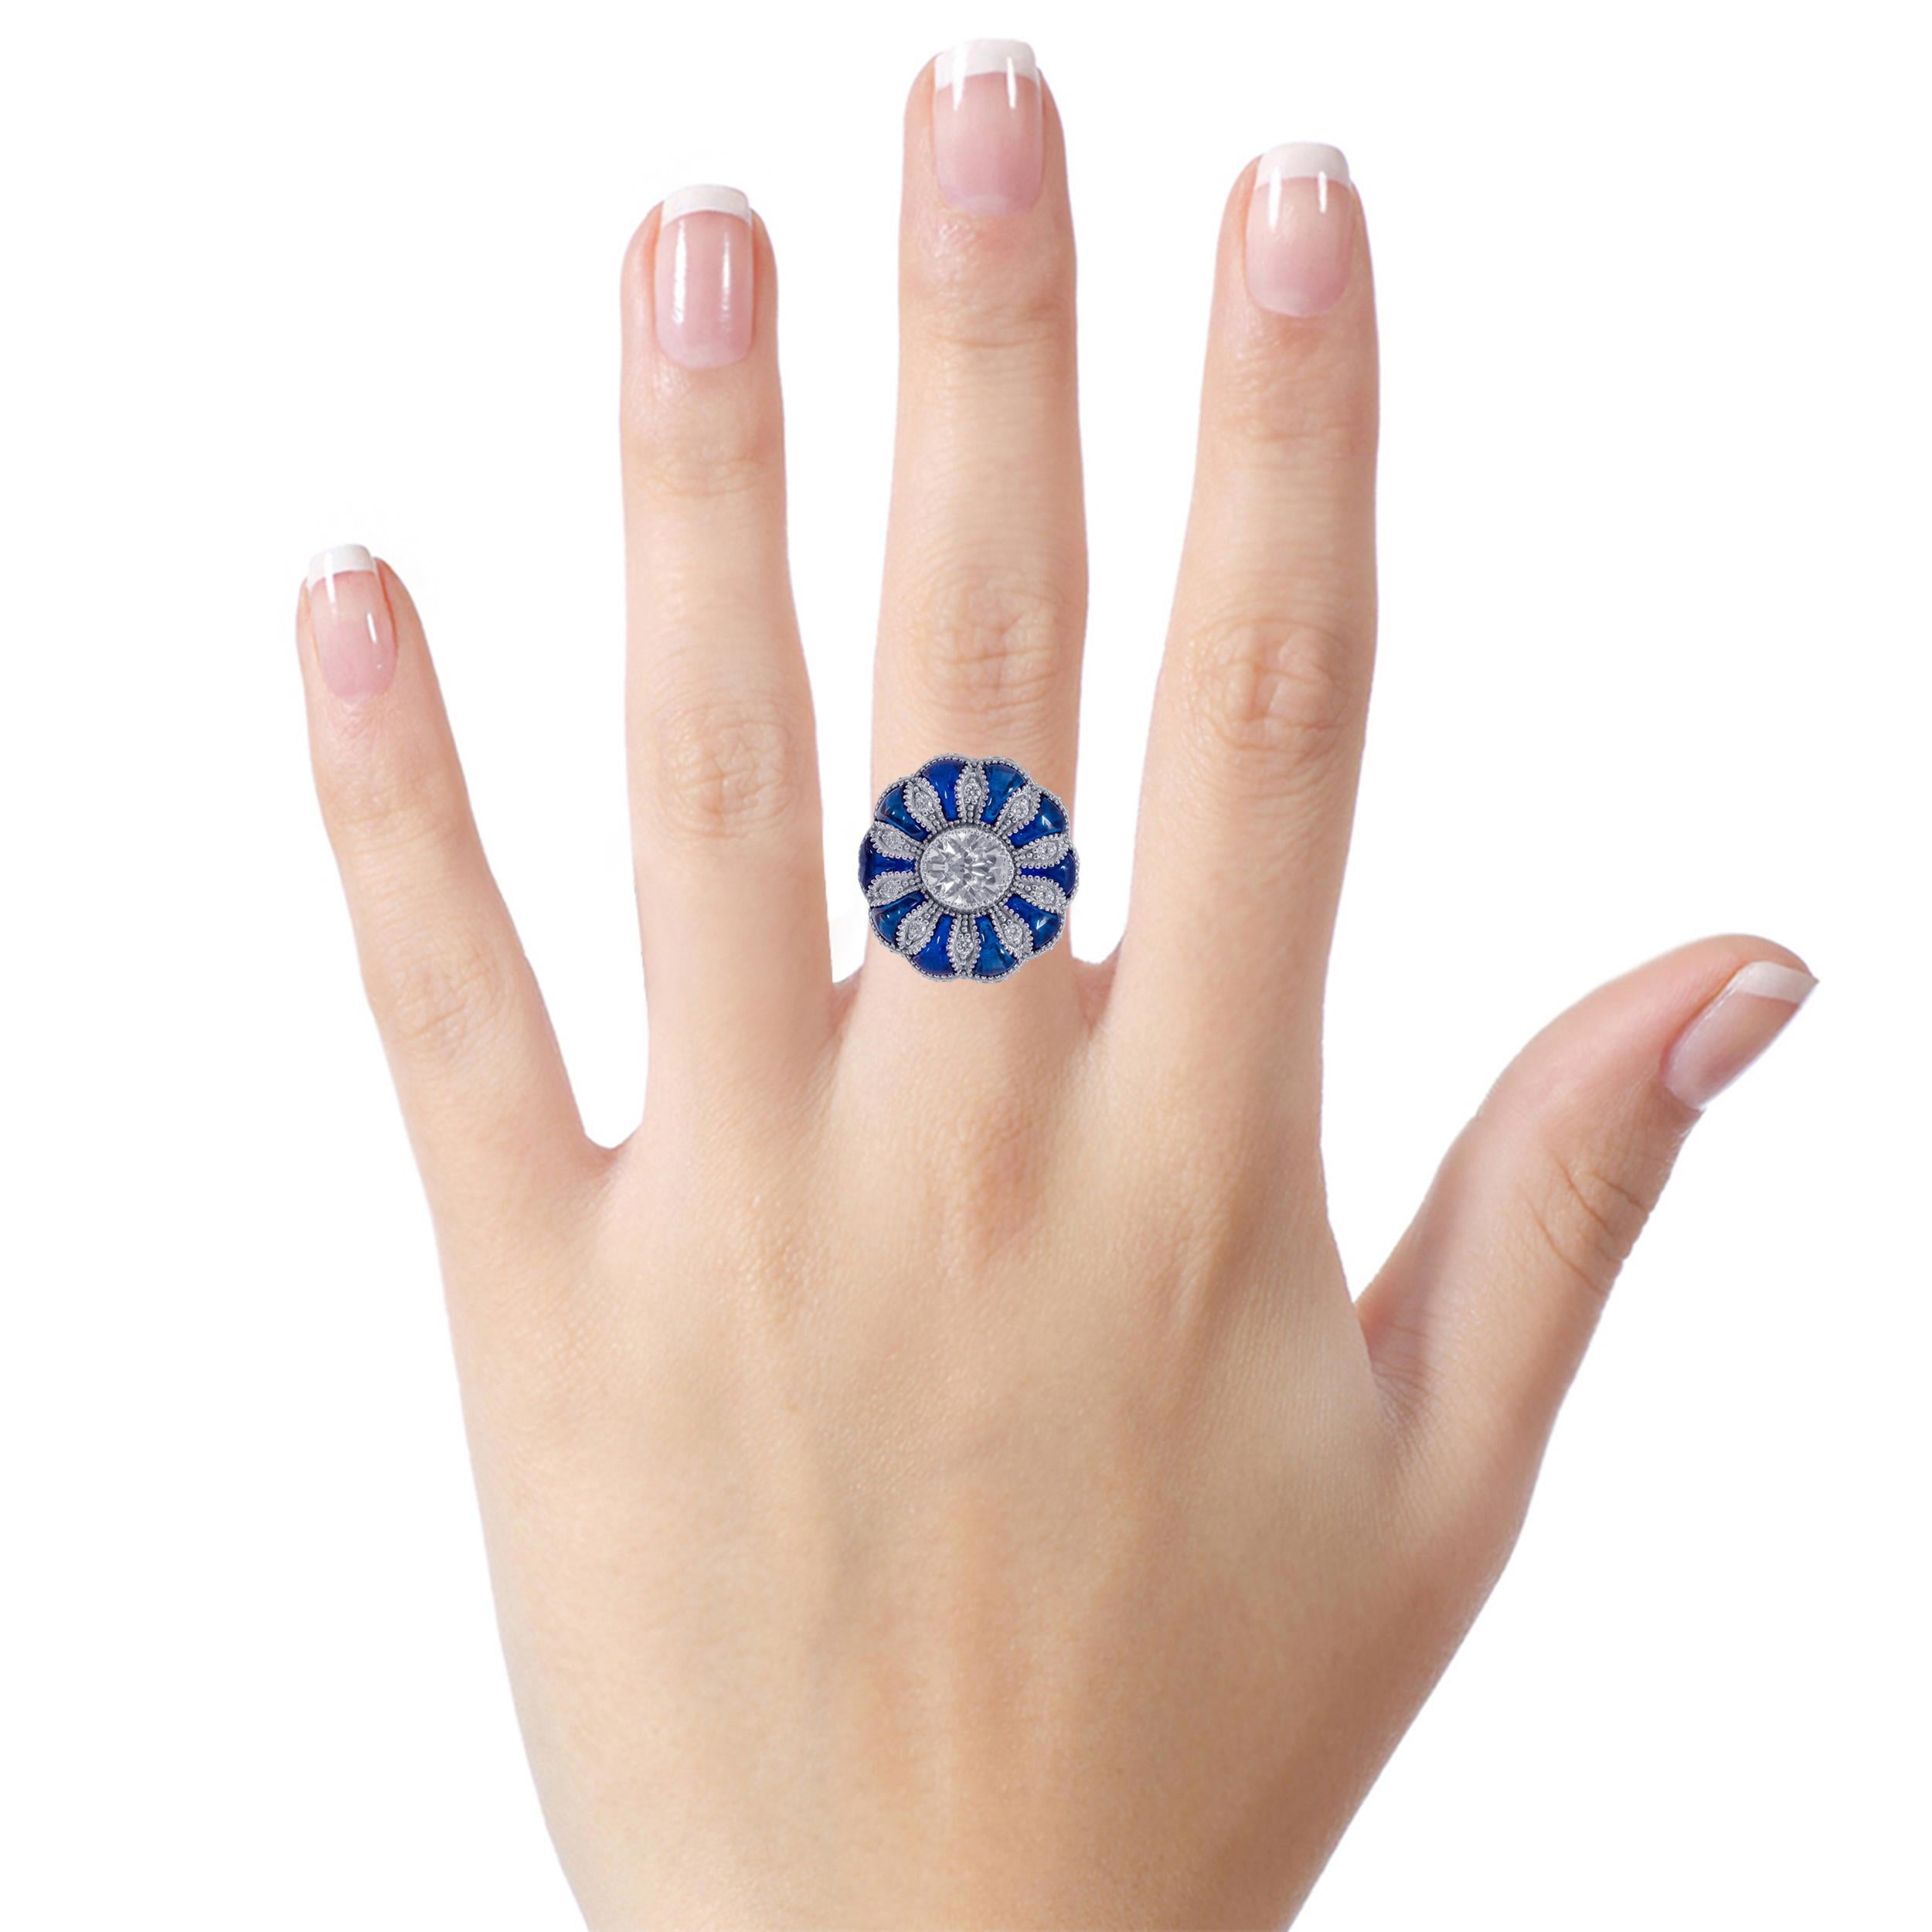 1.35 Carat Old European Cut Diamond with Cabochon Sapphire Ring in 18 Karat Gold

This exceptional old mutual/European cut diamond solitaire and tube-cut vertigo blue sapphire ring is a phenomenal comprehensive design. The diamond round solitaire of